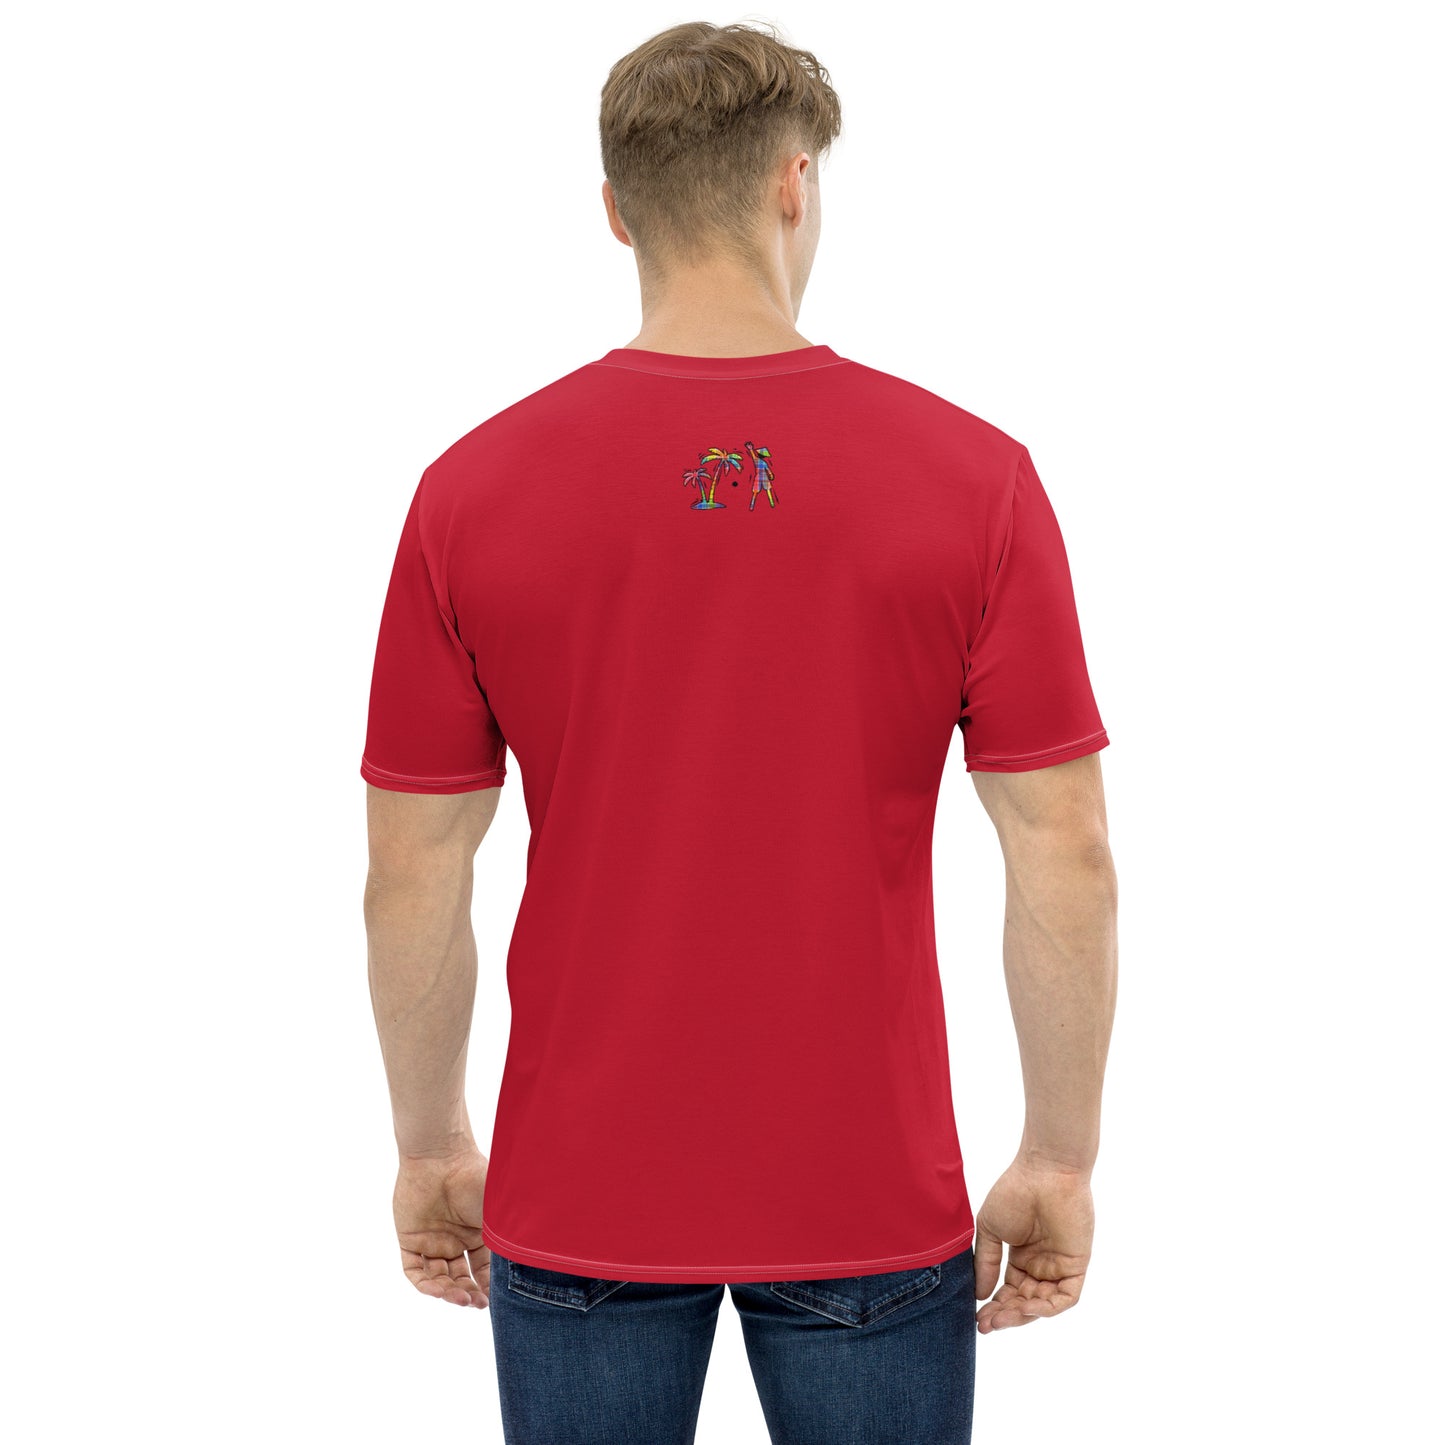 Red V.Localized (Madras) Men’s Dry-Fit T-Shirt